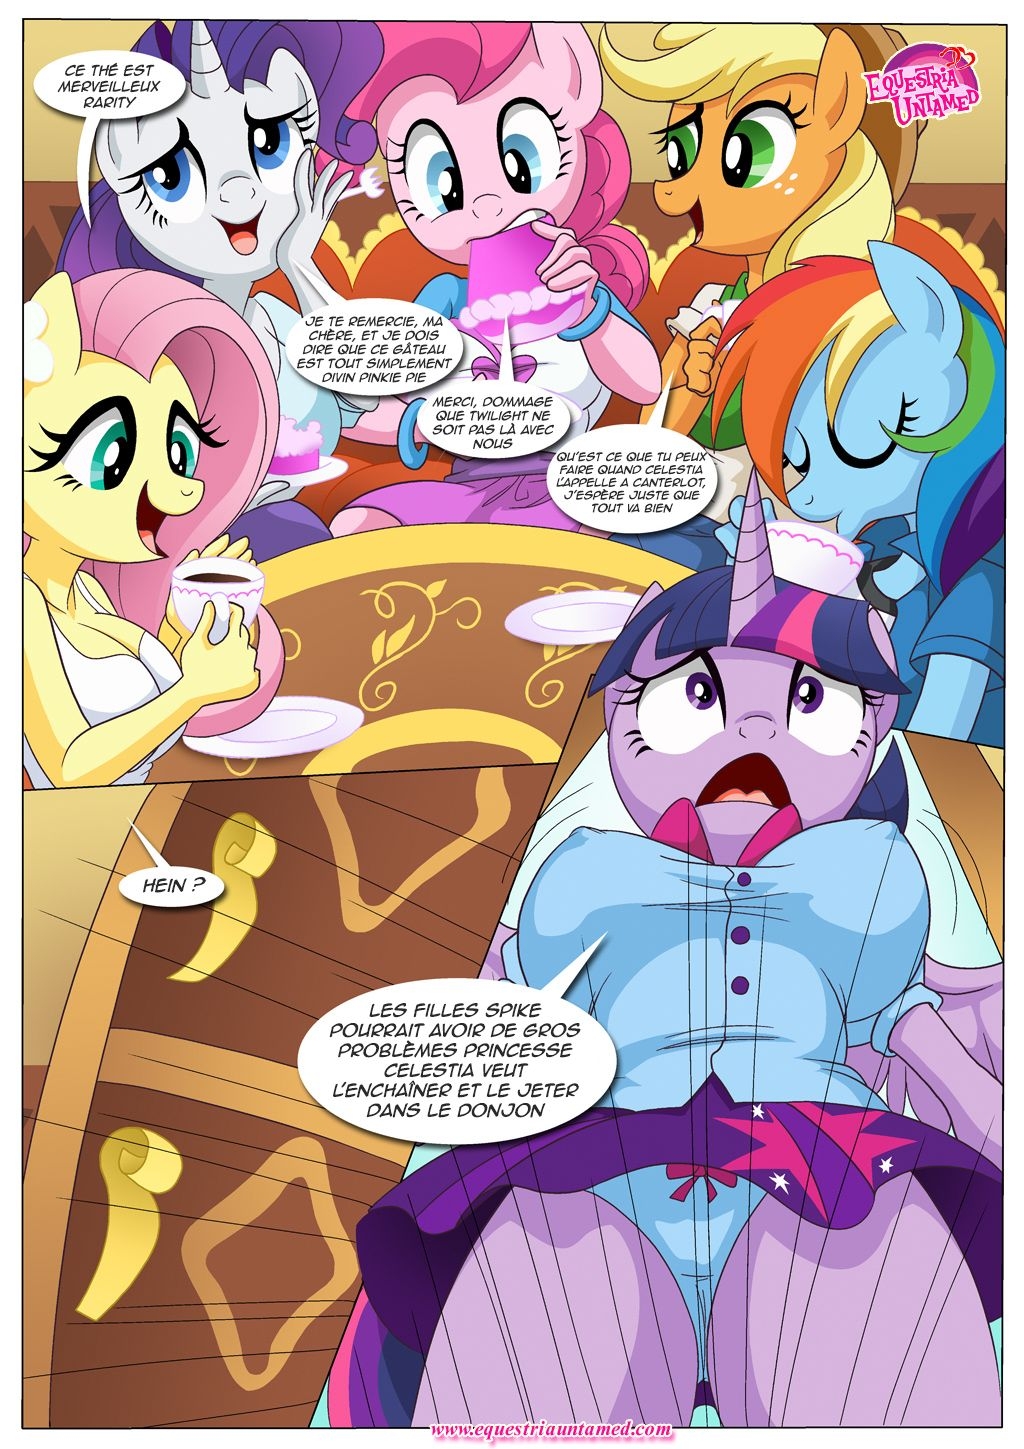 [Palcomix] The Power Of Dragon Mating (My Little Pony Friendship Is Magic) [French] [Melotan] 1